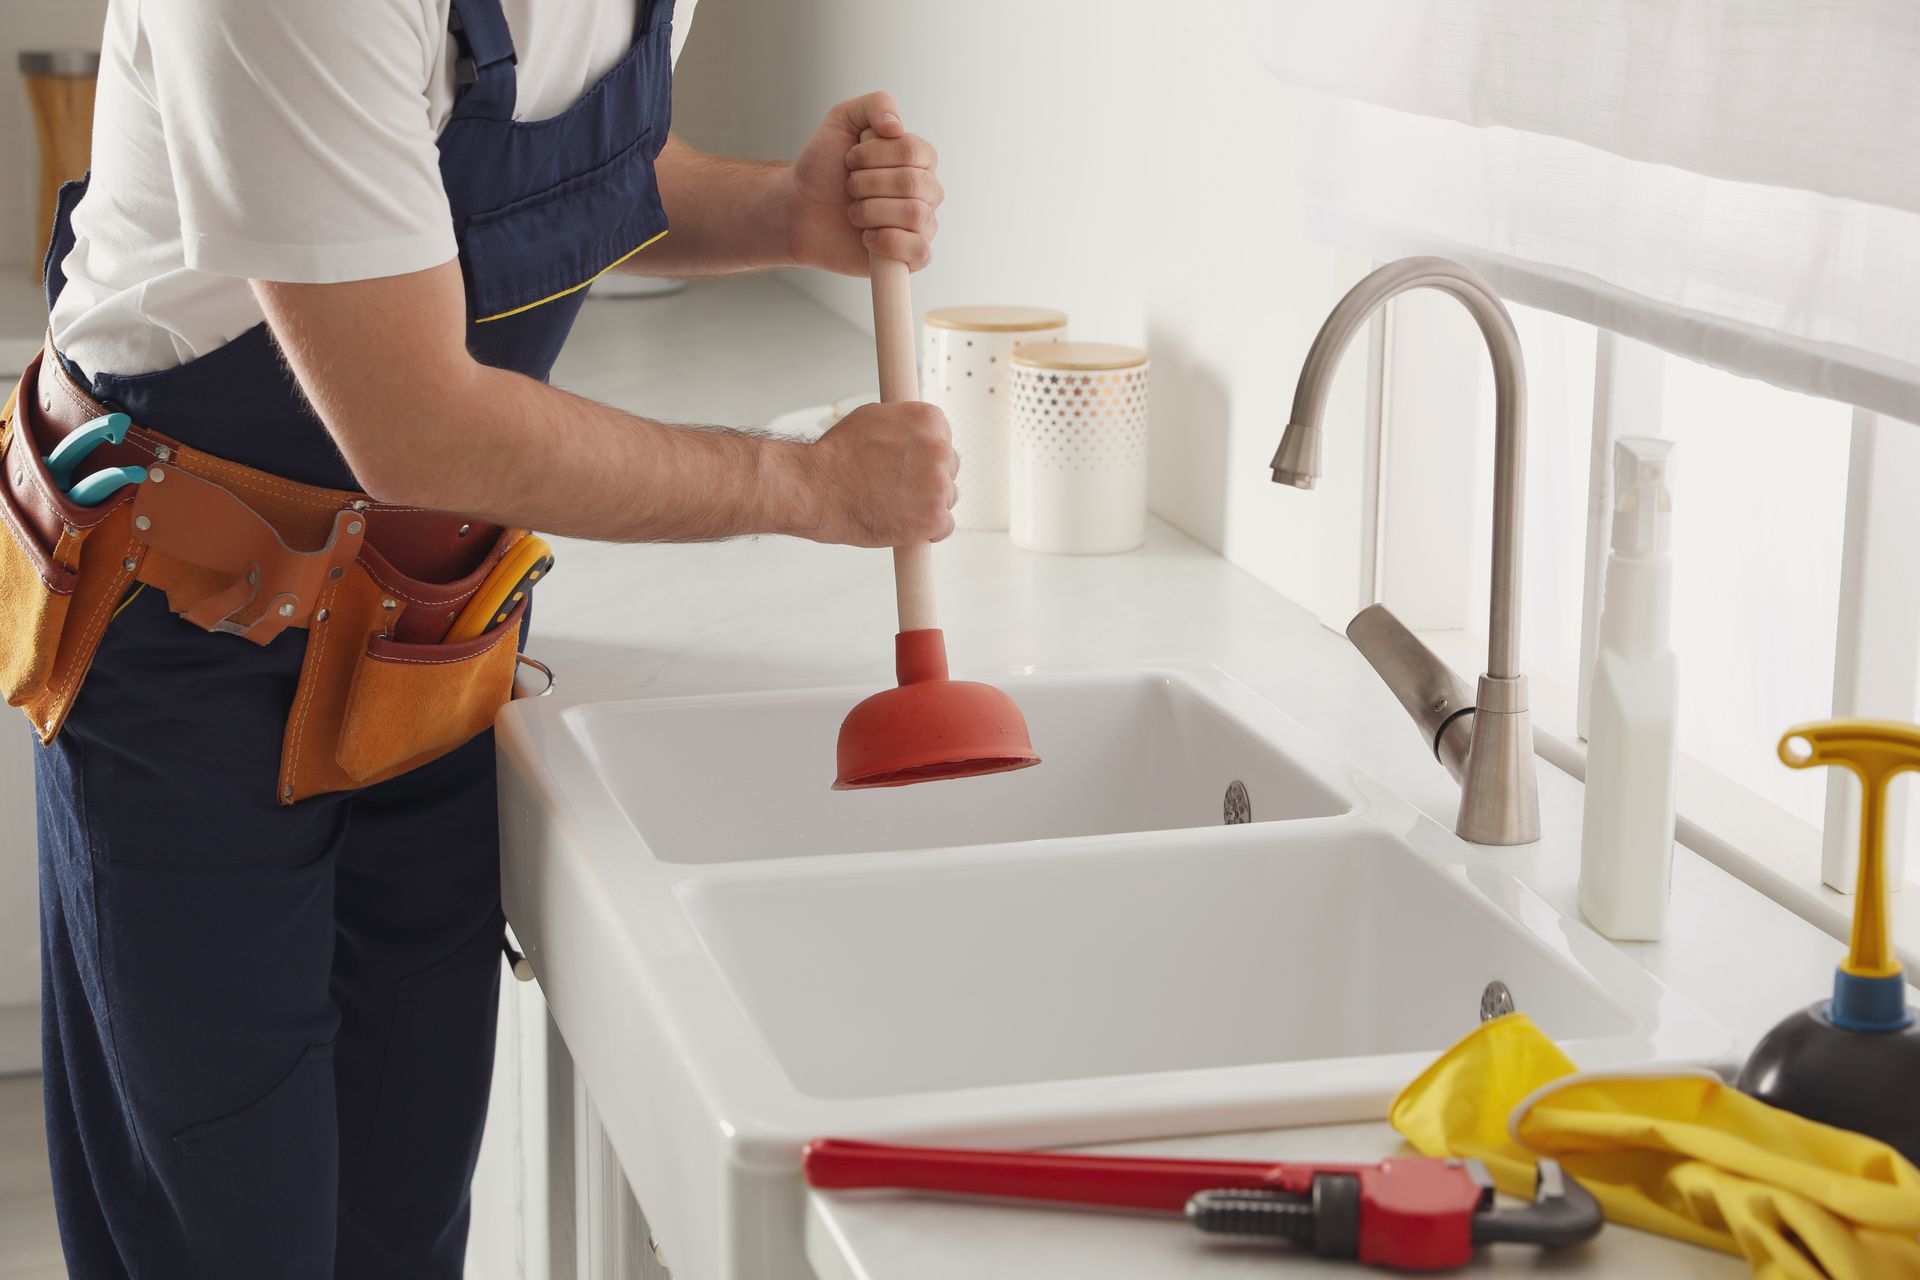 a man is using a plunger to fix a kitchen sink .